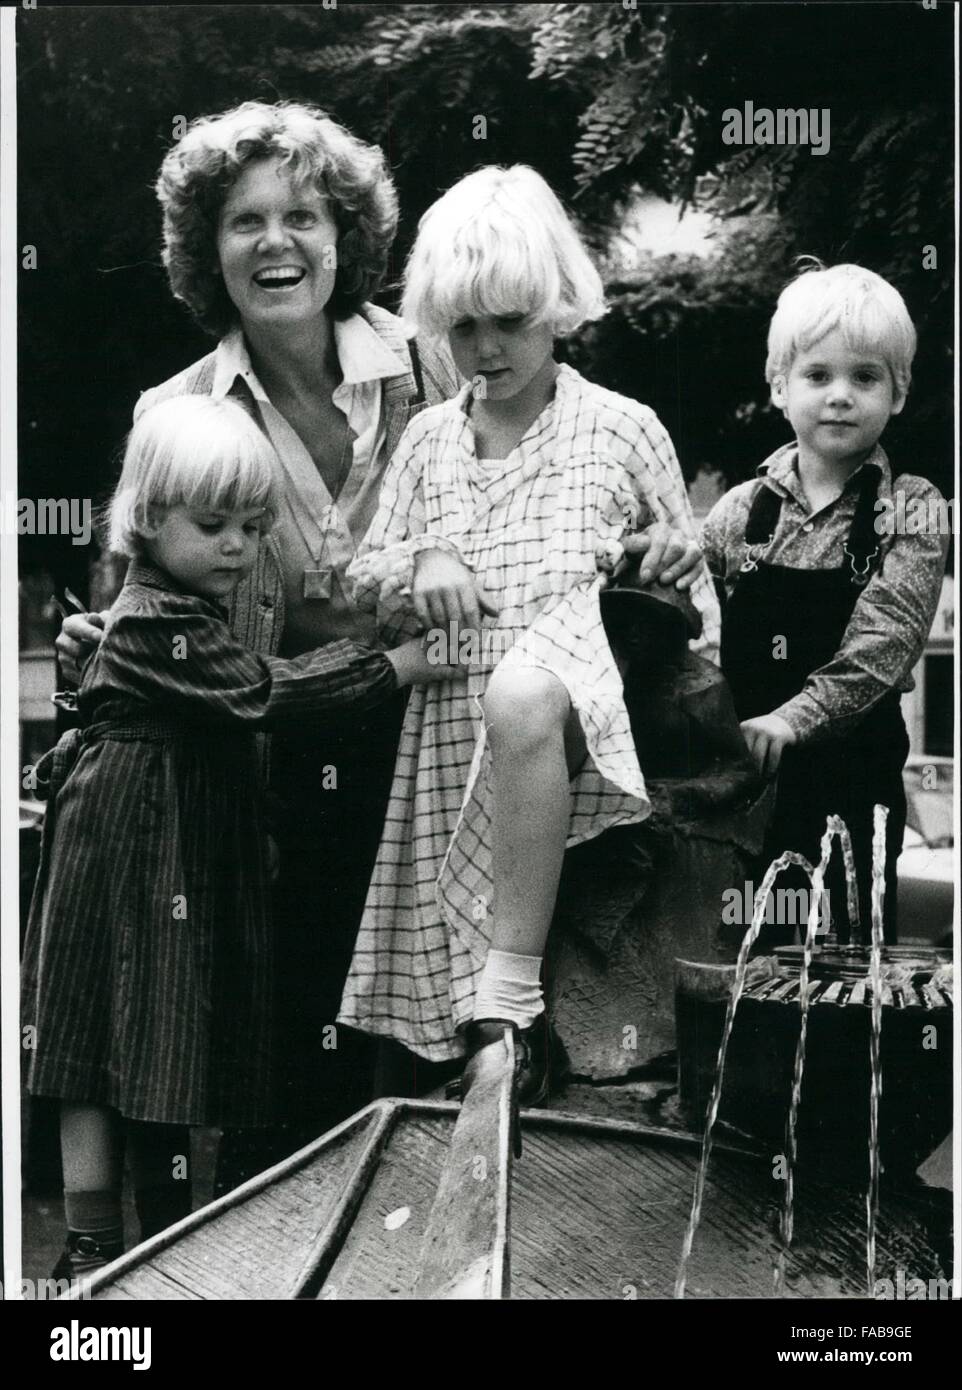 1981 - Opera-Singer Anja Silja With Her Children:- A radiating mother. with her ''little trio'': Anja Silja! and here she plays her most liked part, - not at the opera, but at home with OLGA (2), Julia (6) and Benedict (4) - from the left - (and her life companion Christoph von Dohnany). Nevertheless the celebrated singer always has to break away from her family, - the friends of opera want her. In these days she is a guest star in Frankfurt/West Germany in the ''Fliegender Hollander'', then she is on stage at the ''Hamburger Staatsoper'' as Marie in ''Wozzeck'' (first night on April 5th.81) Stock Photo